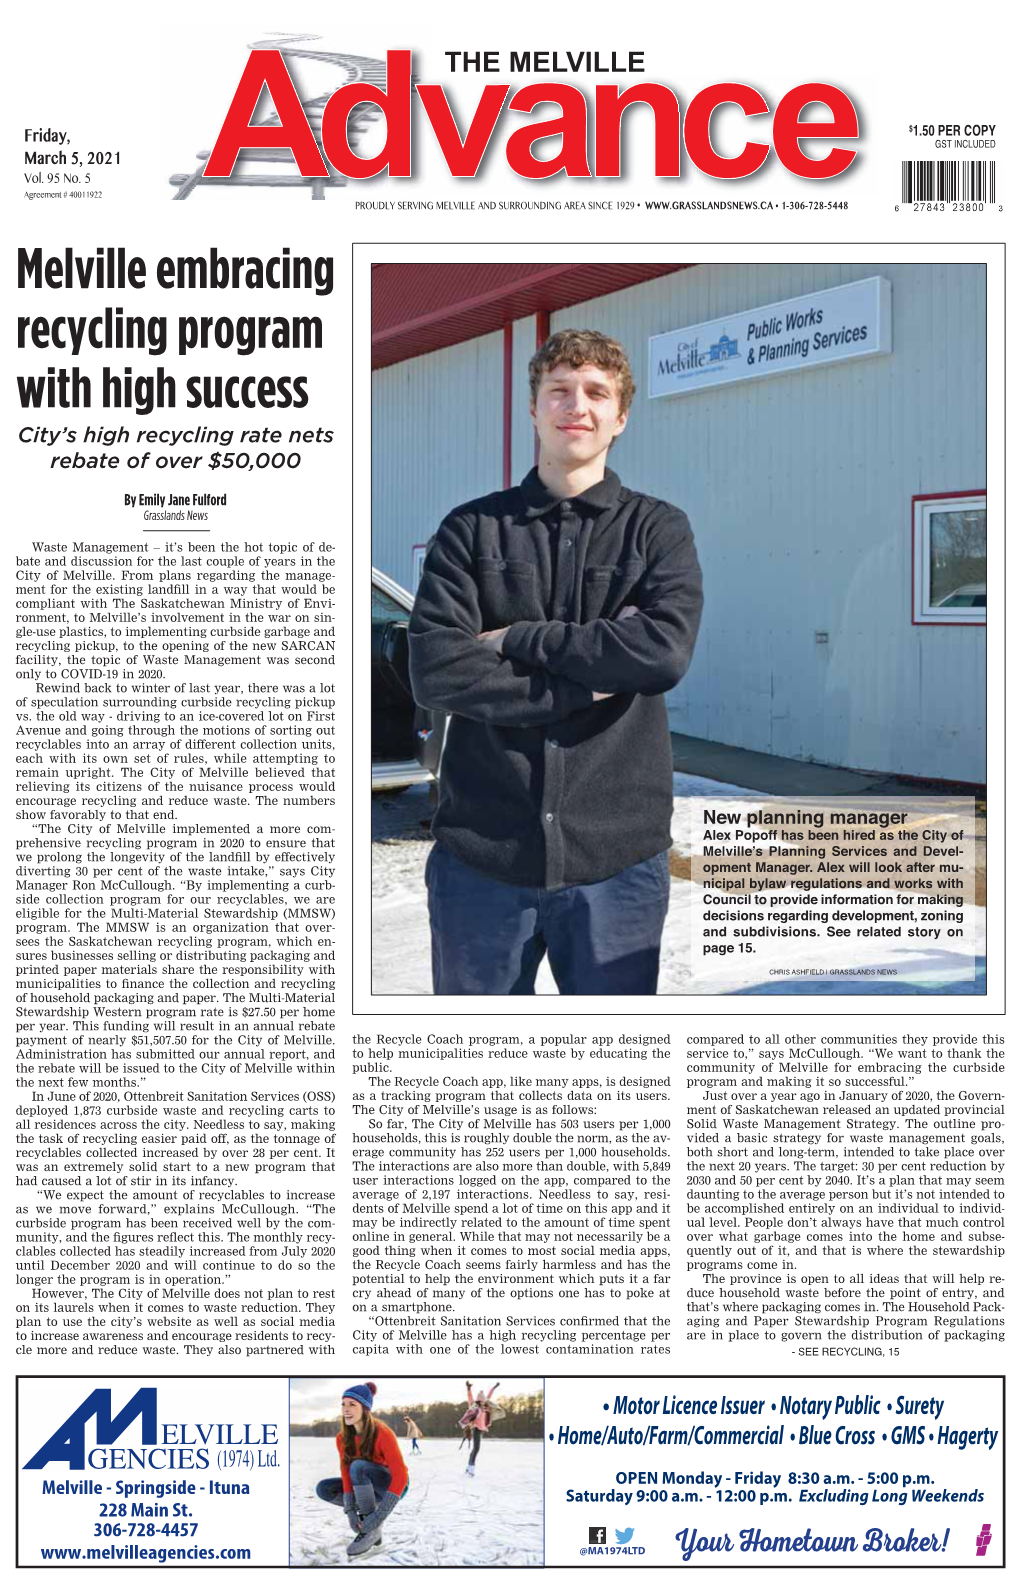 Melville Embracing Recycling Program with High Success City’S High Recycling Rate Nets Rebate of Over $50,000